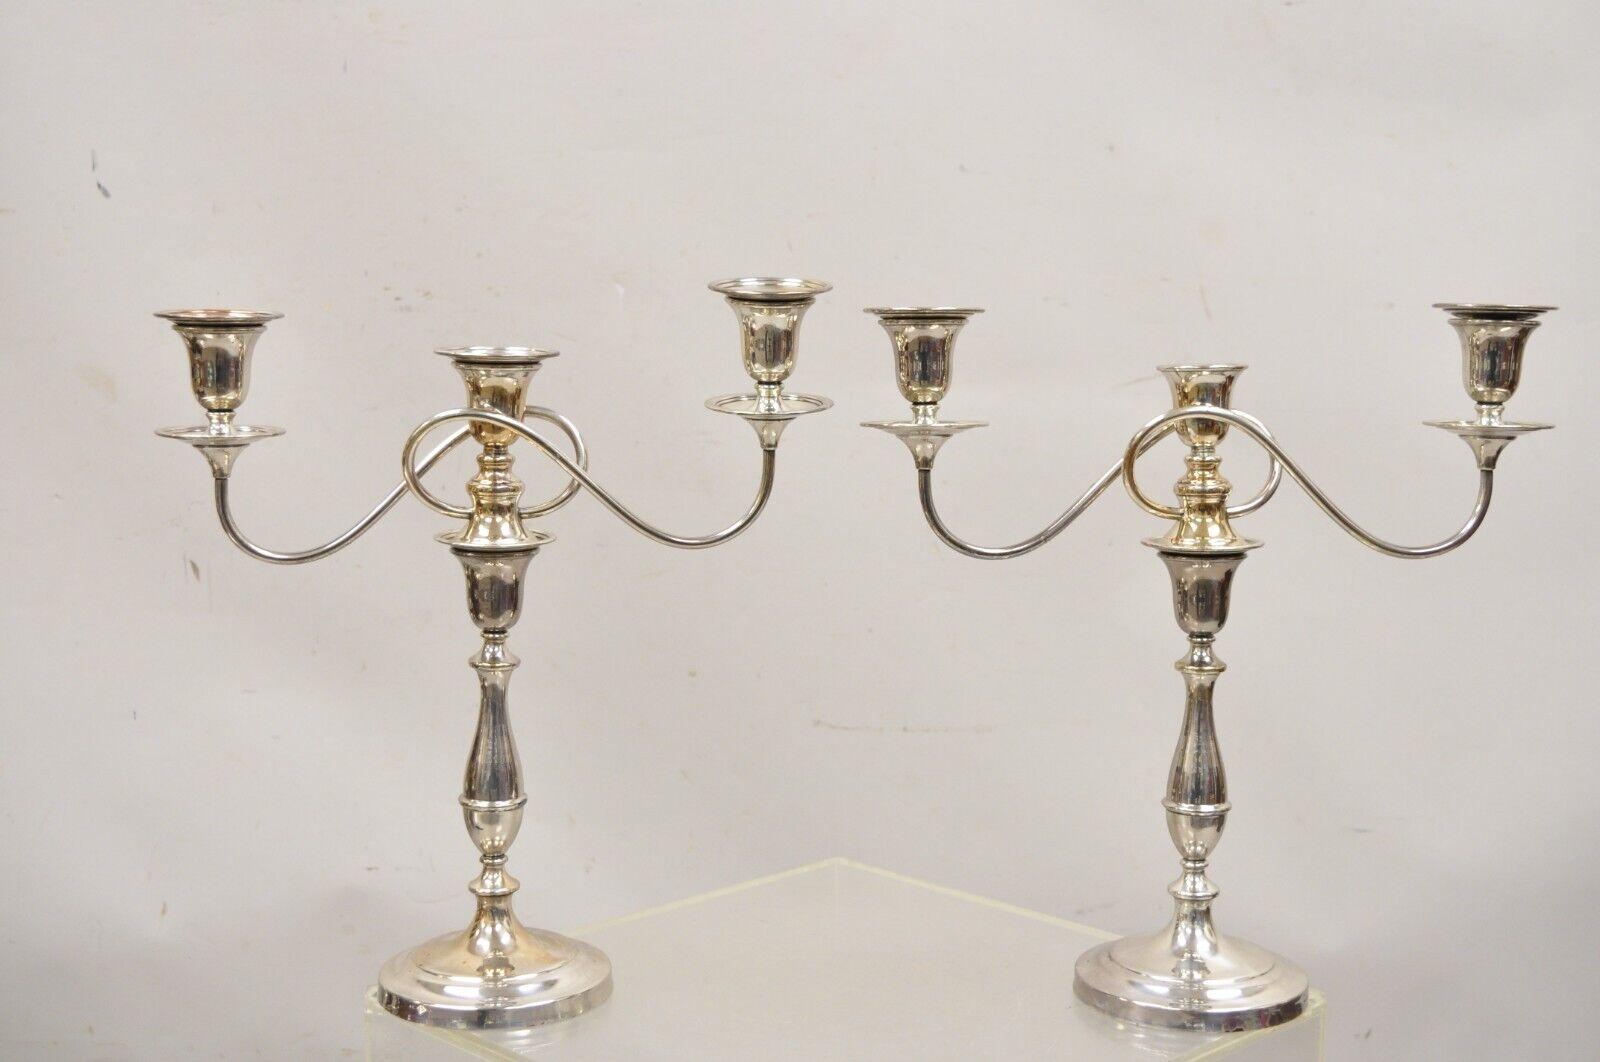 Vintage English Edwardian Style Silver Plated Scrolling Twin Arm Candelabras - Pair. Item features 3 candle holders each, stamped 